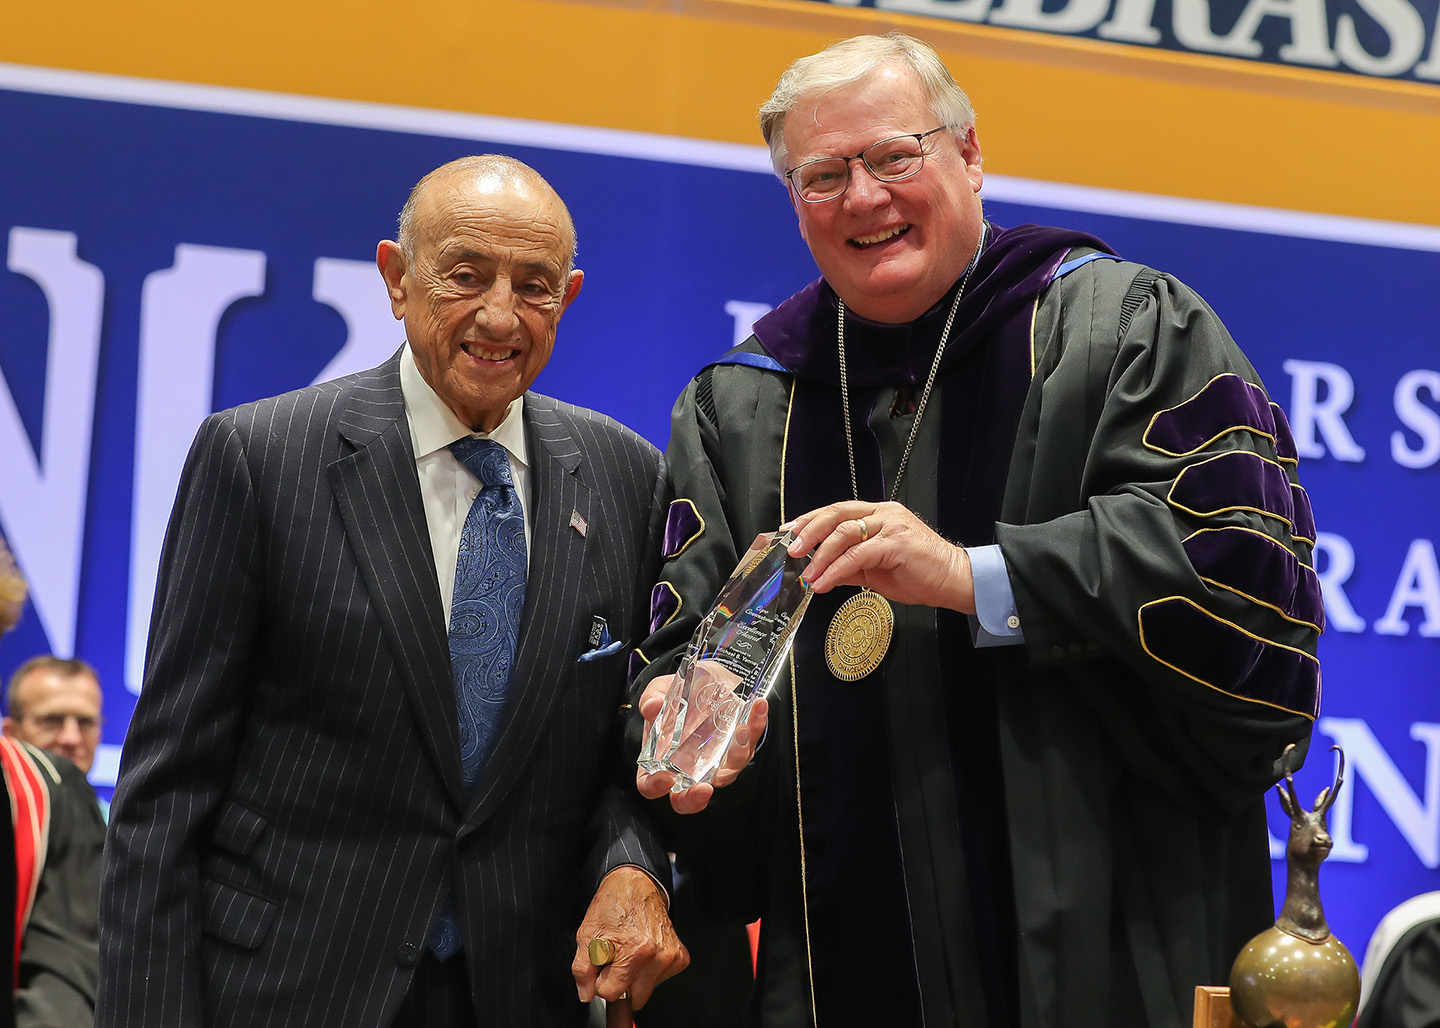 UNK Chancellor Doug Kristensen, right, presents the Ron and Carol Cope Cornerstone of Excellence Award to Michael Yanney during Friday’s spring commencement ceremony at UNK. (Photos by Erika Pritchard, UNK Communications)